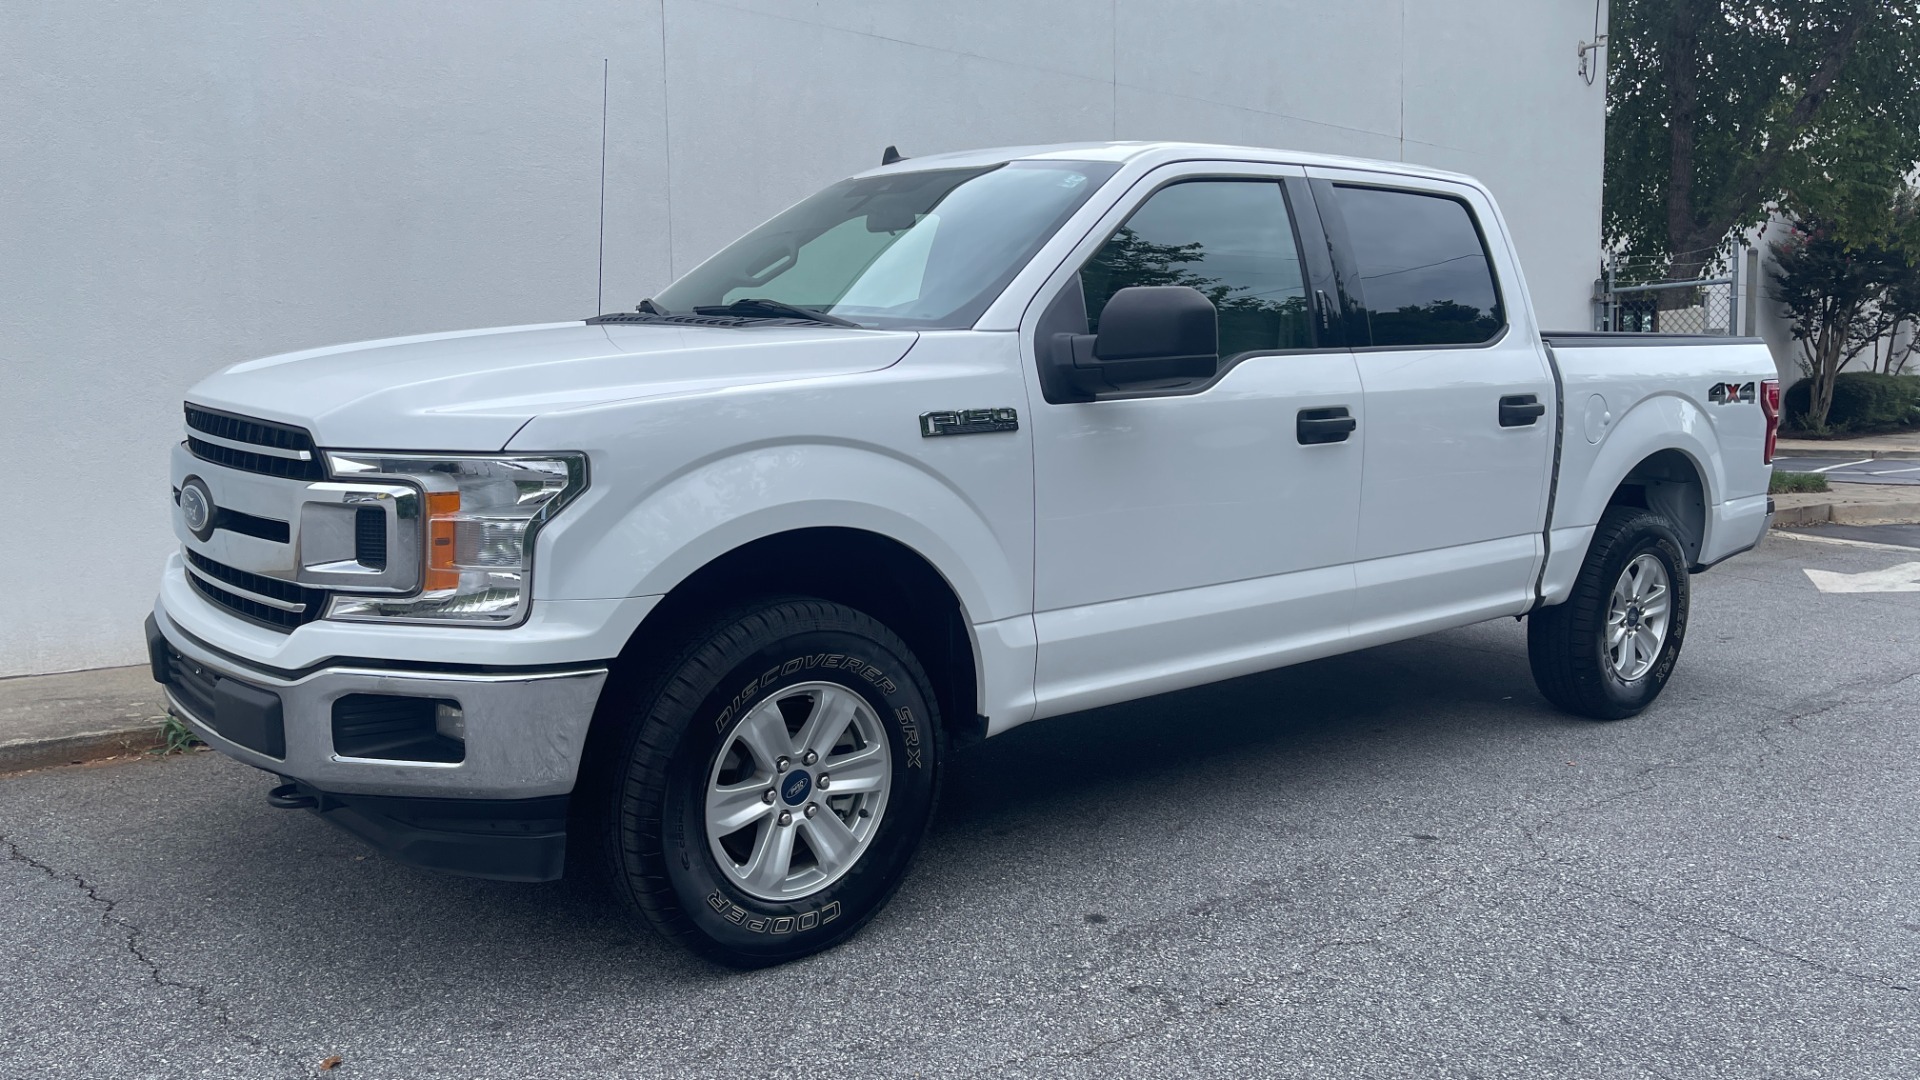 Used 2020 Ford F-150 XLT / 5.0L V8 / CREW CAB 4X4 / 17IN ALUMINUM WHEELS / CLOTH SEATS for sale $43,995 at Formula Imports in Charlotte NC 28227 1